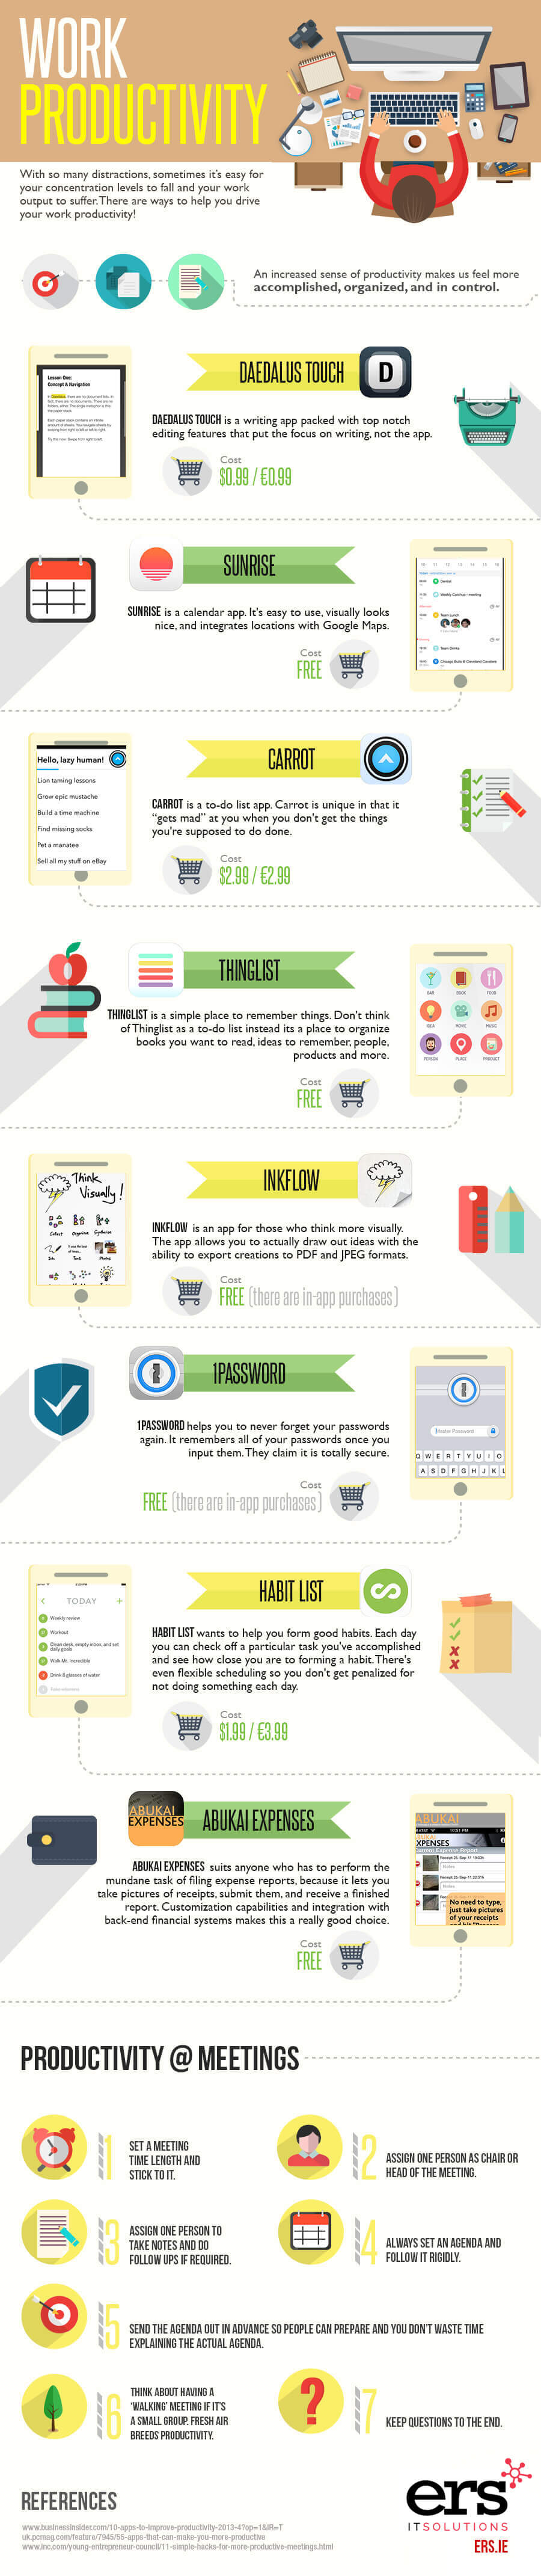 Productivity-at-Work-Infographic copy